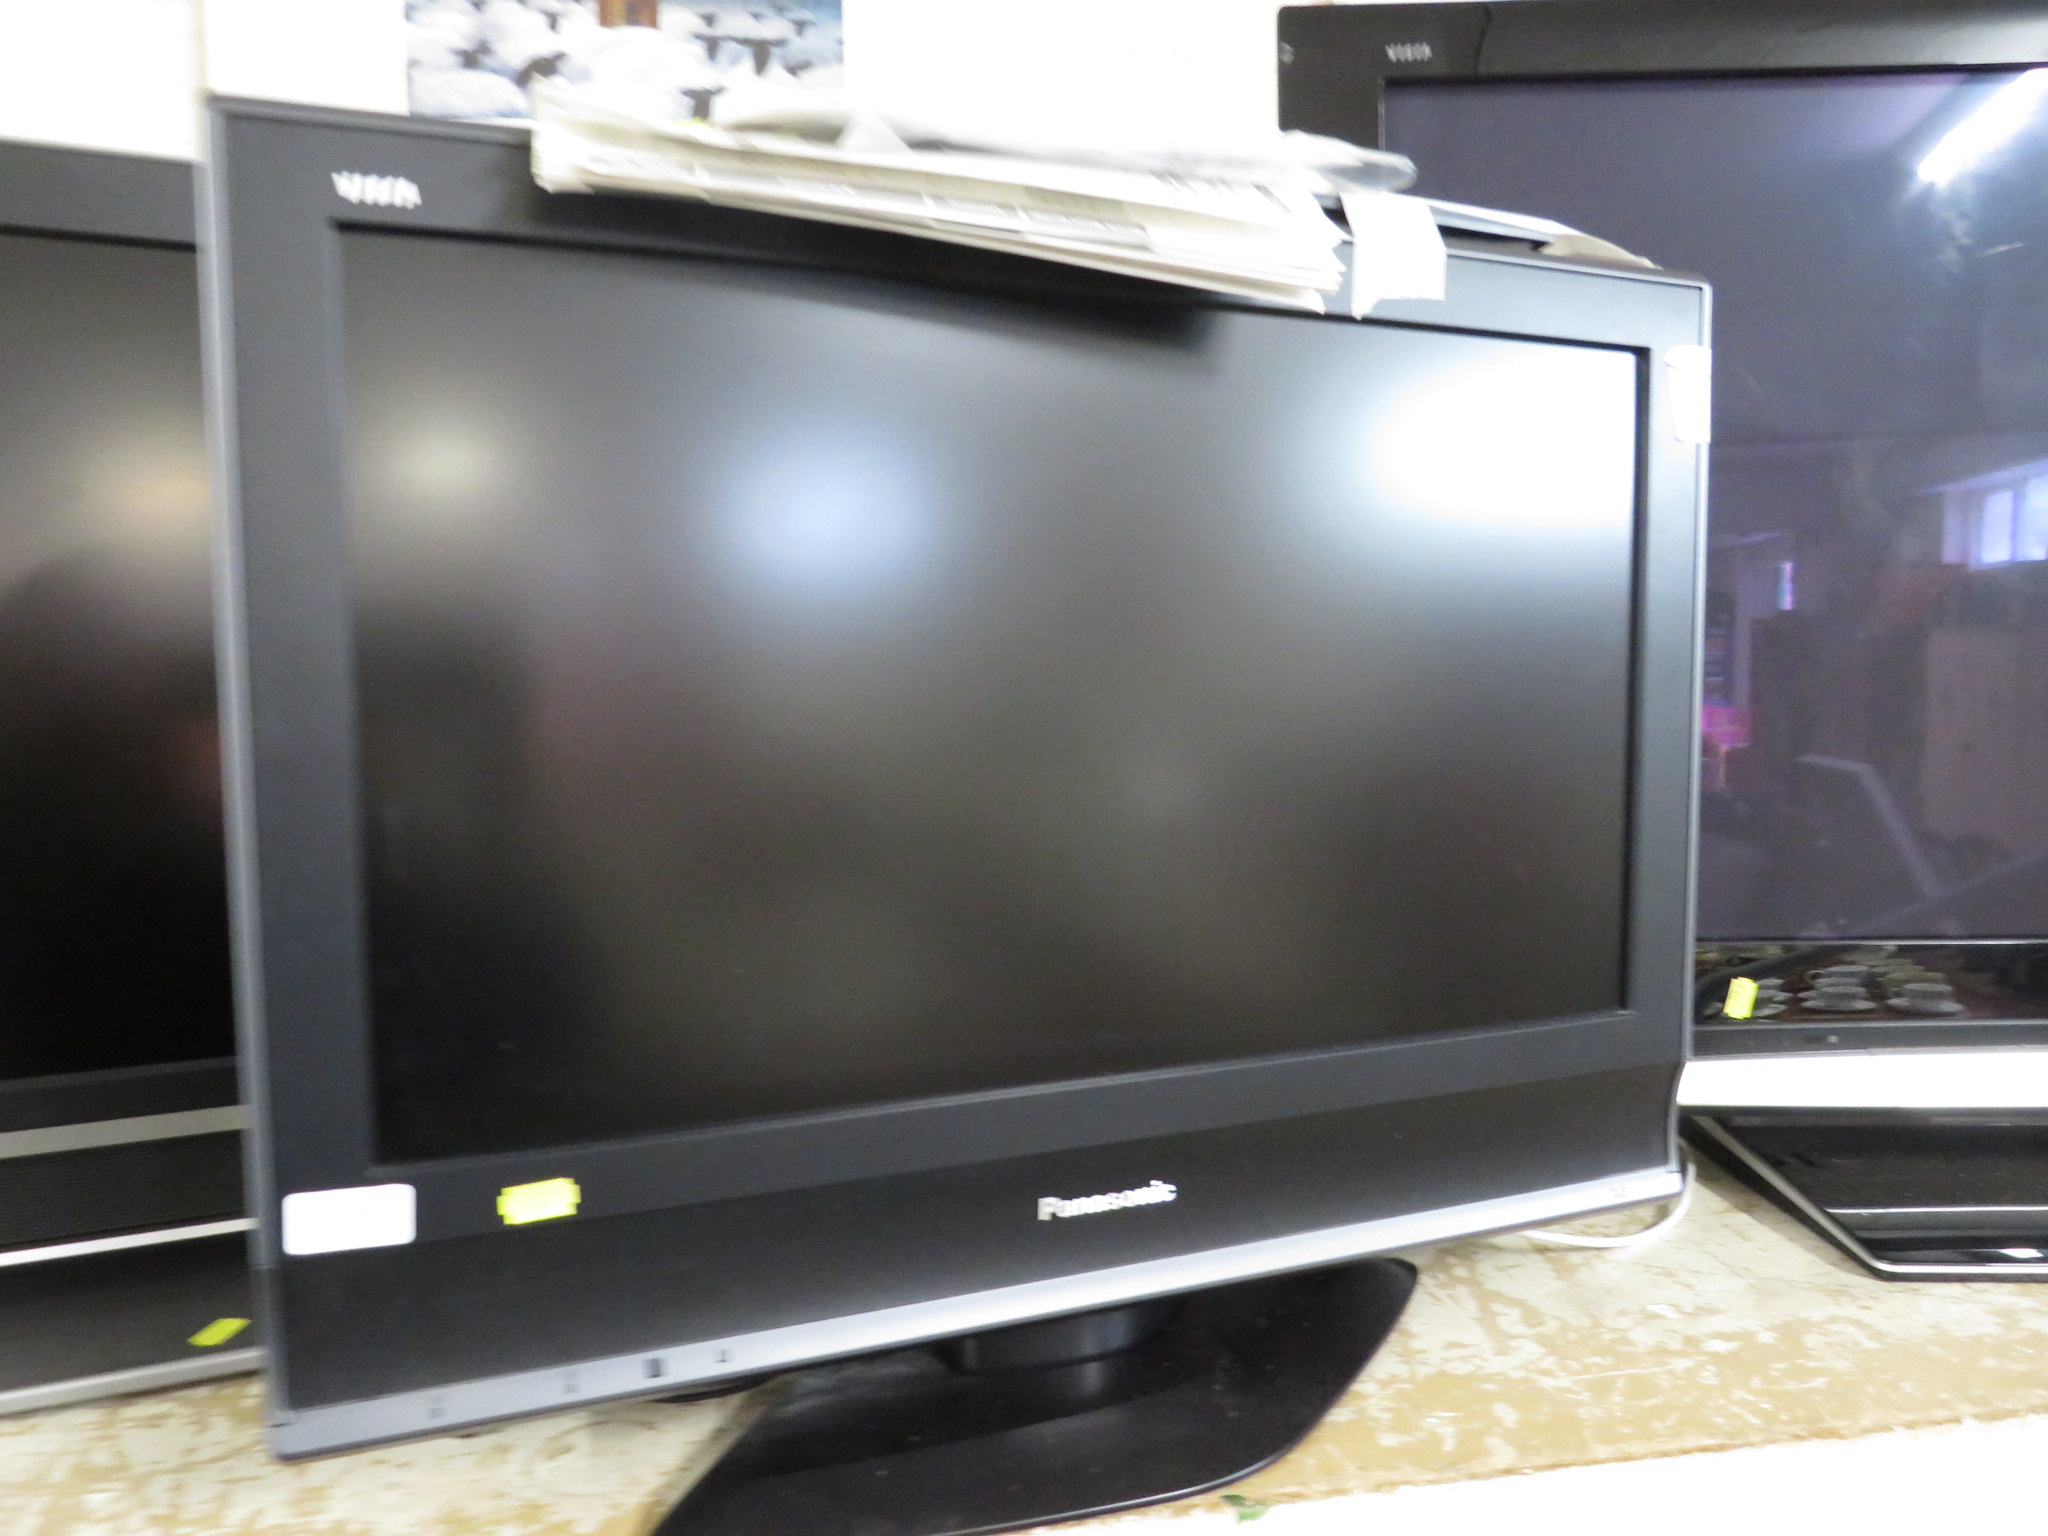 A PANASONIC 26 INCH VIERA LCD TELEVISION WITH REMOTE CONTROL AND INSTRUCTIONS.